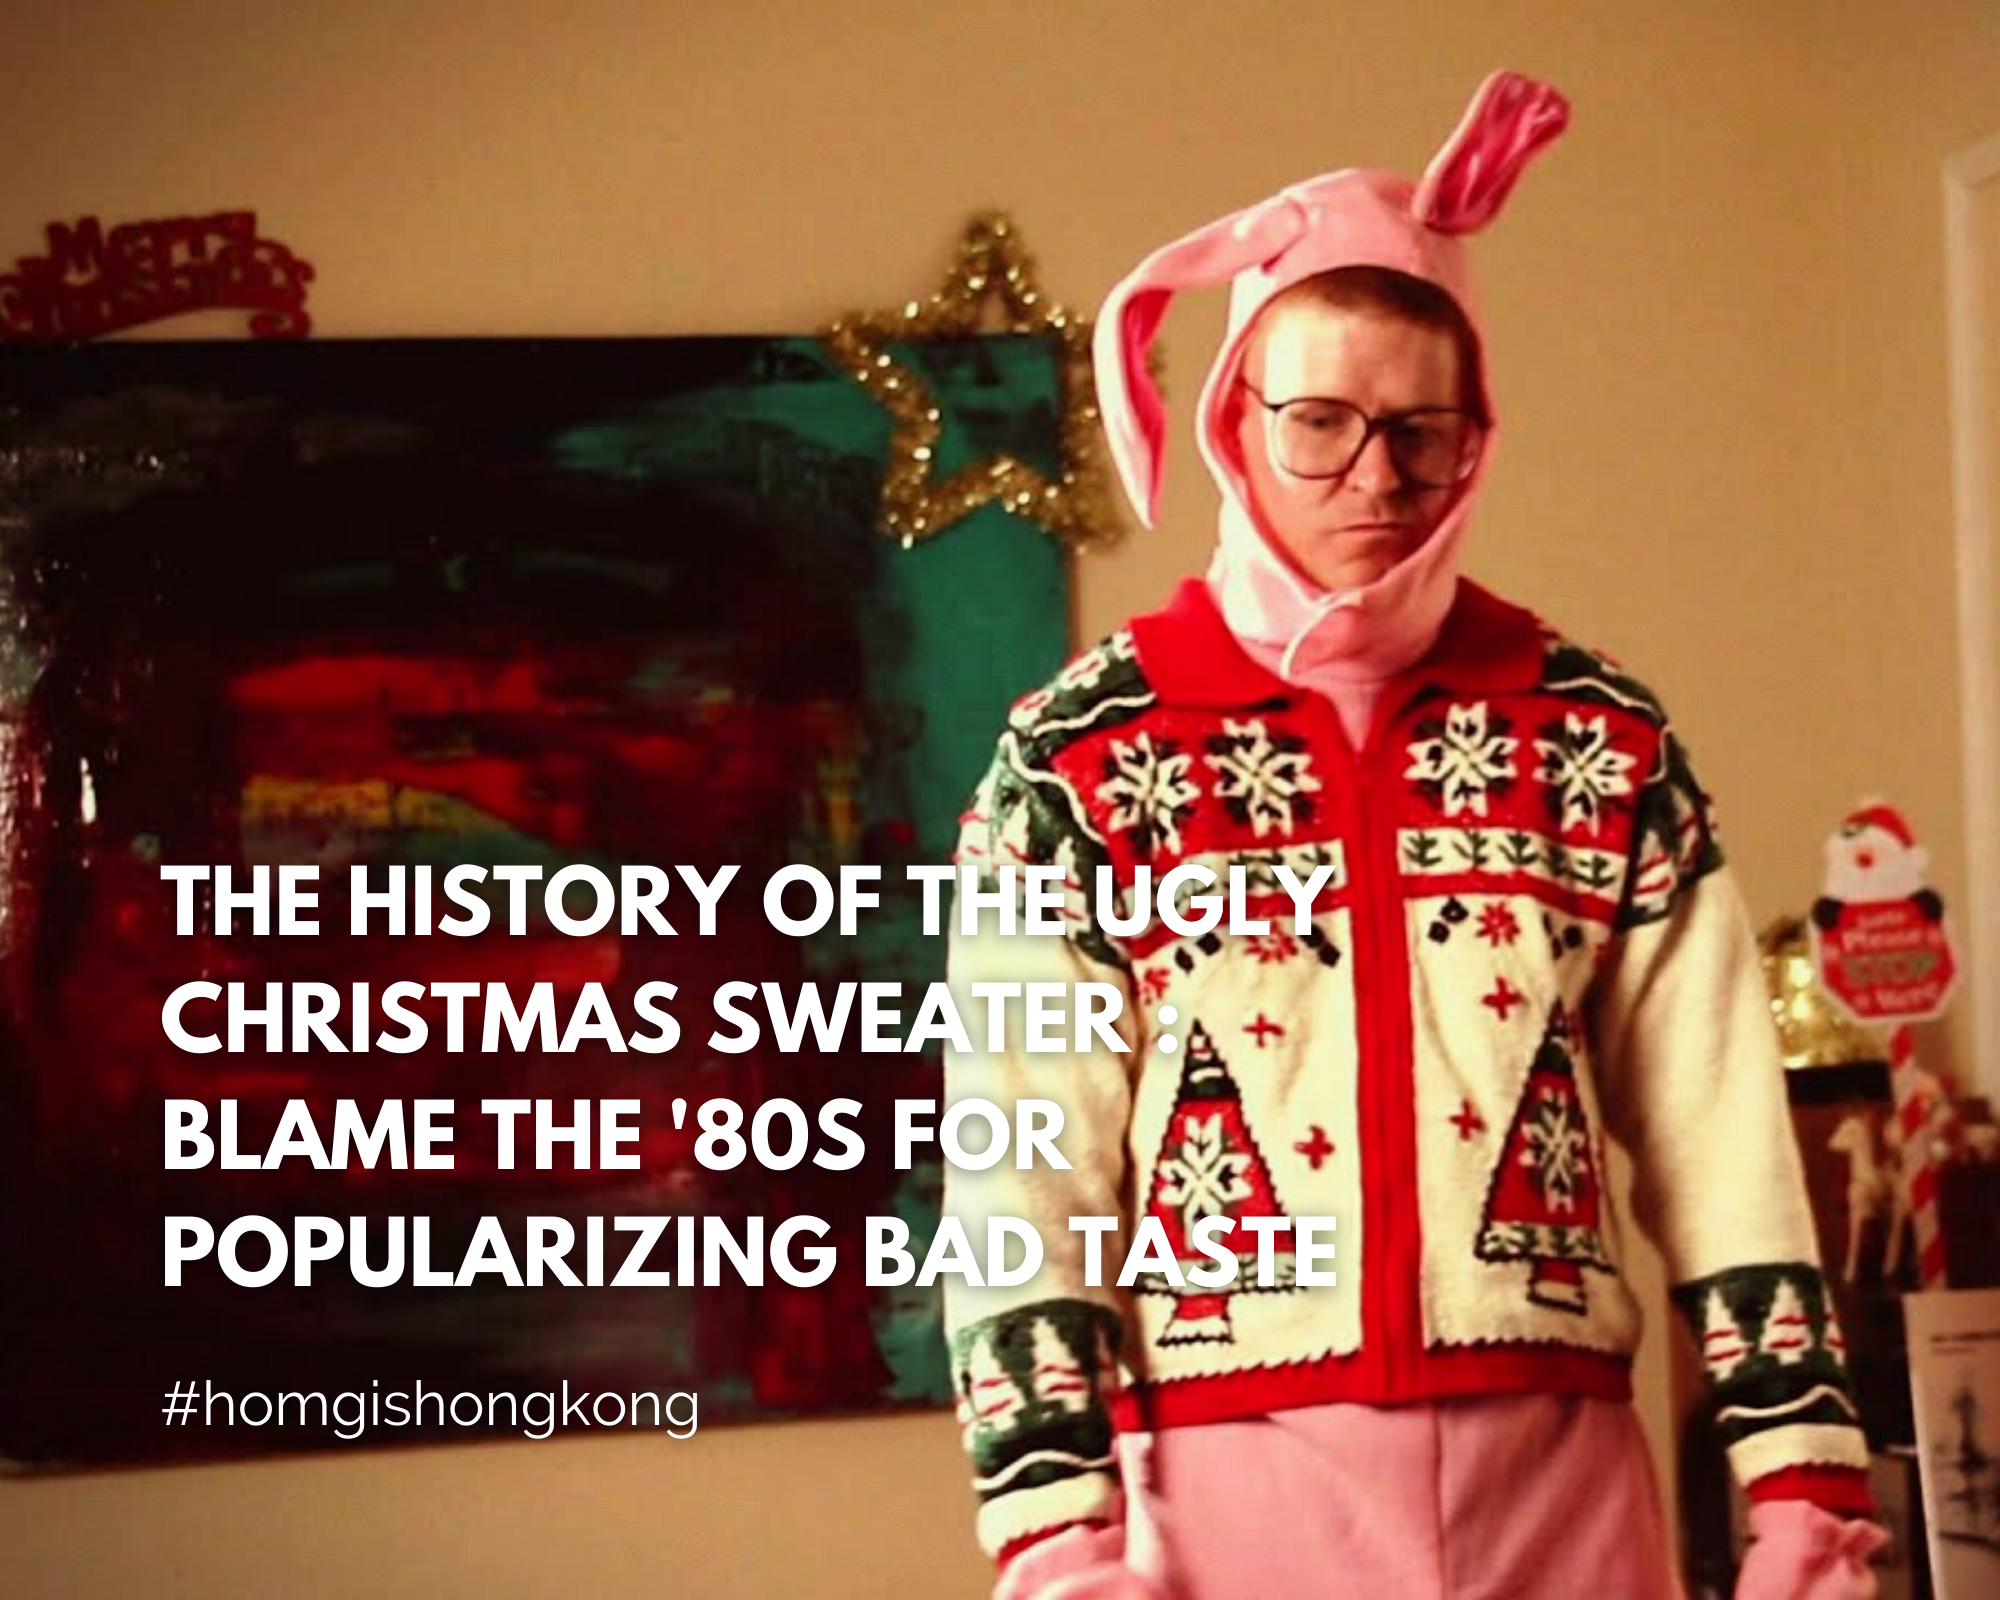 The History of the Ugly Christmas Sweater : Blame the '80s for popularizing bad taste